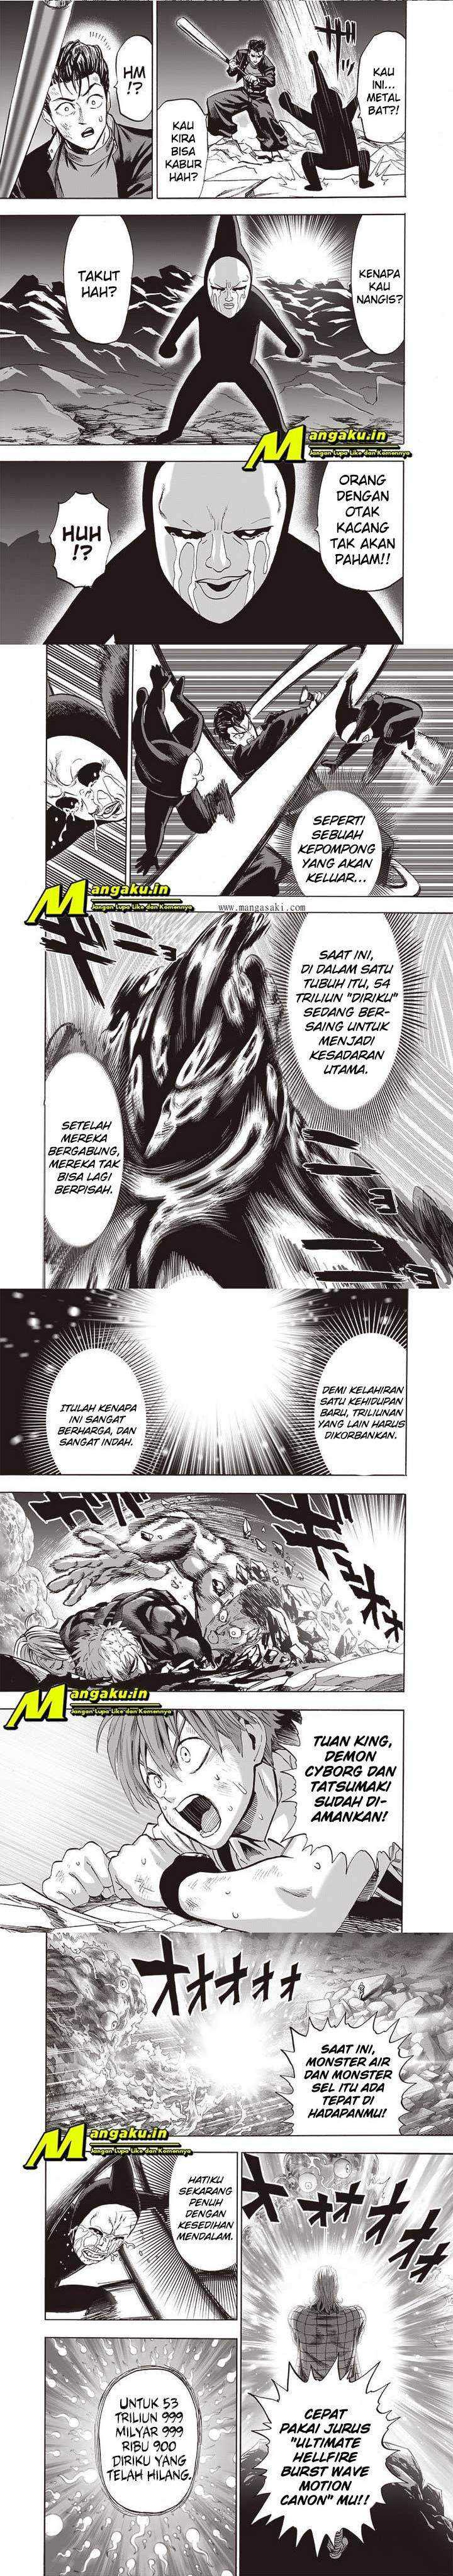 One Punch Man Chapter 206 10